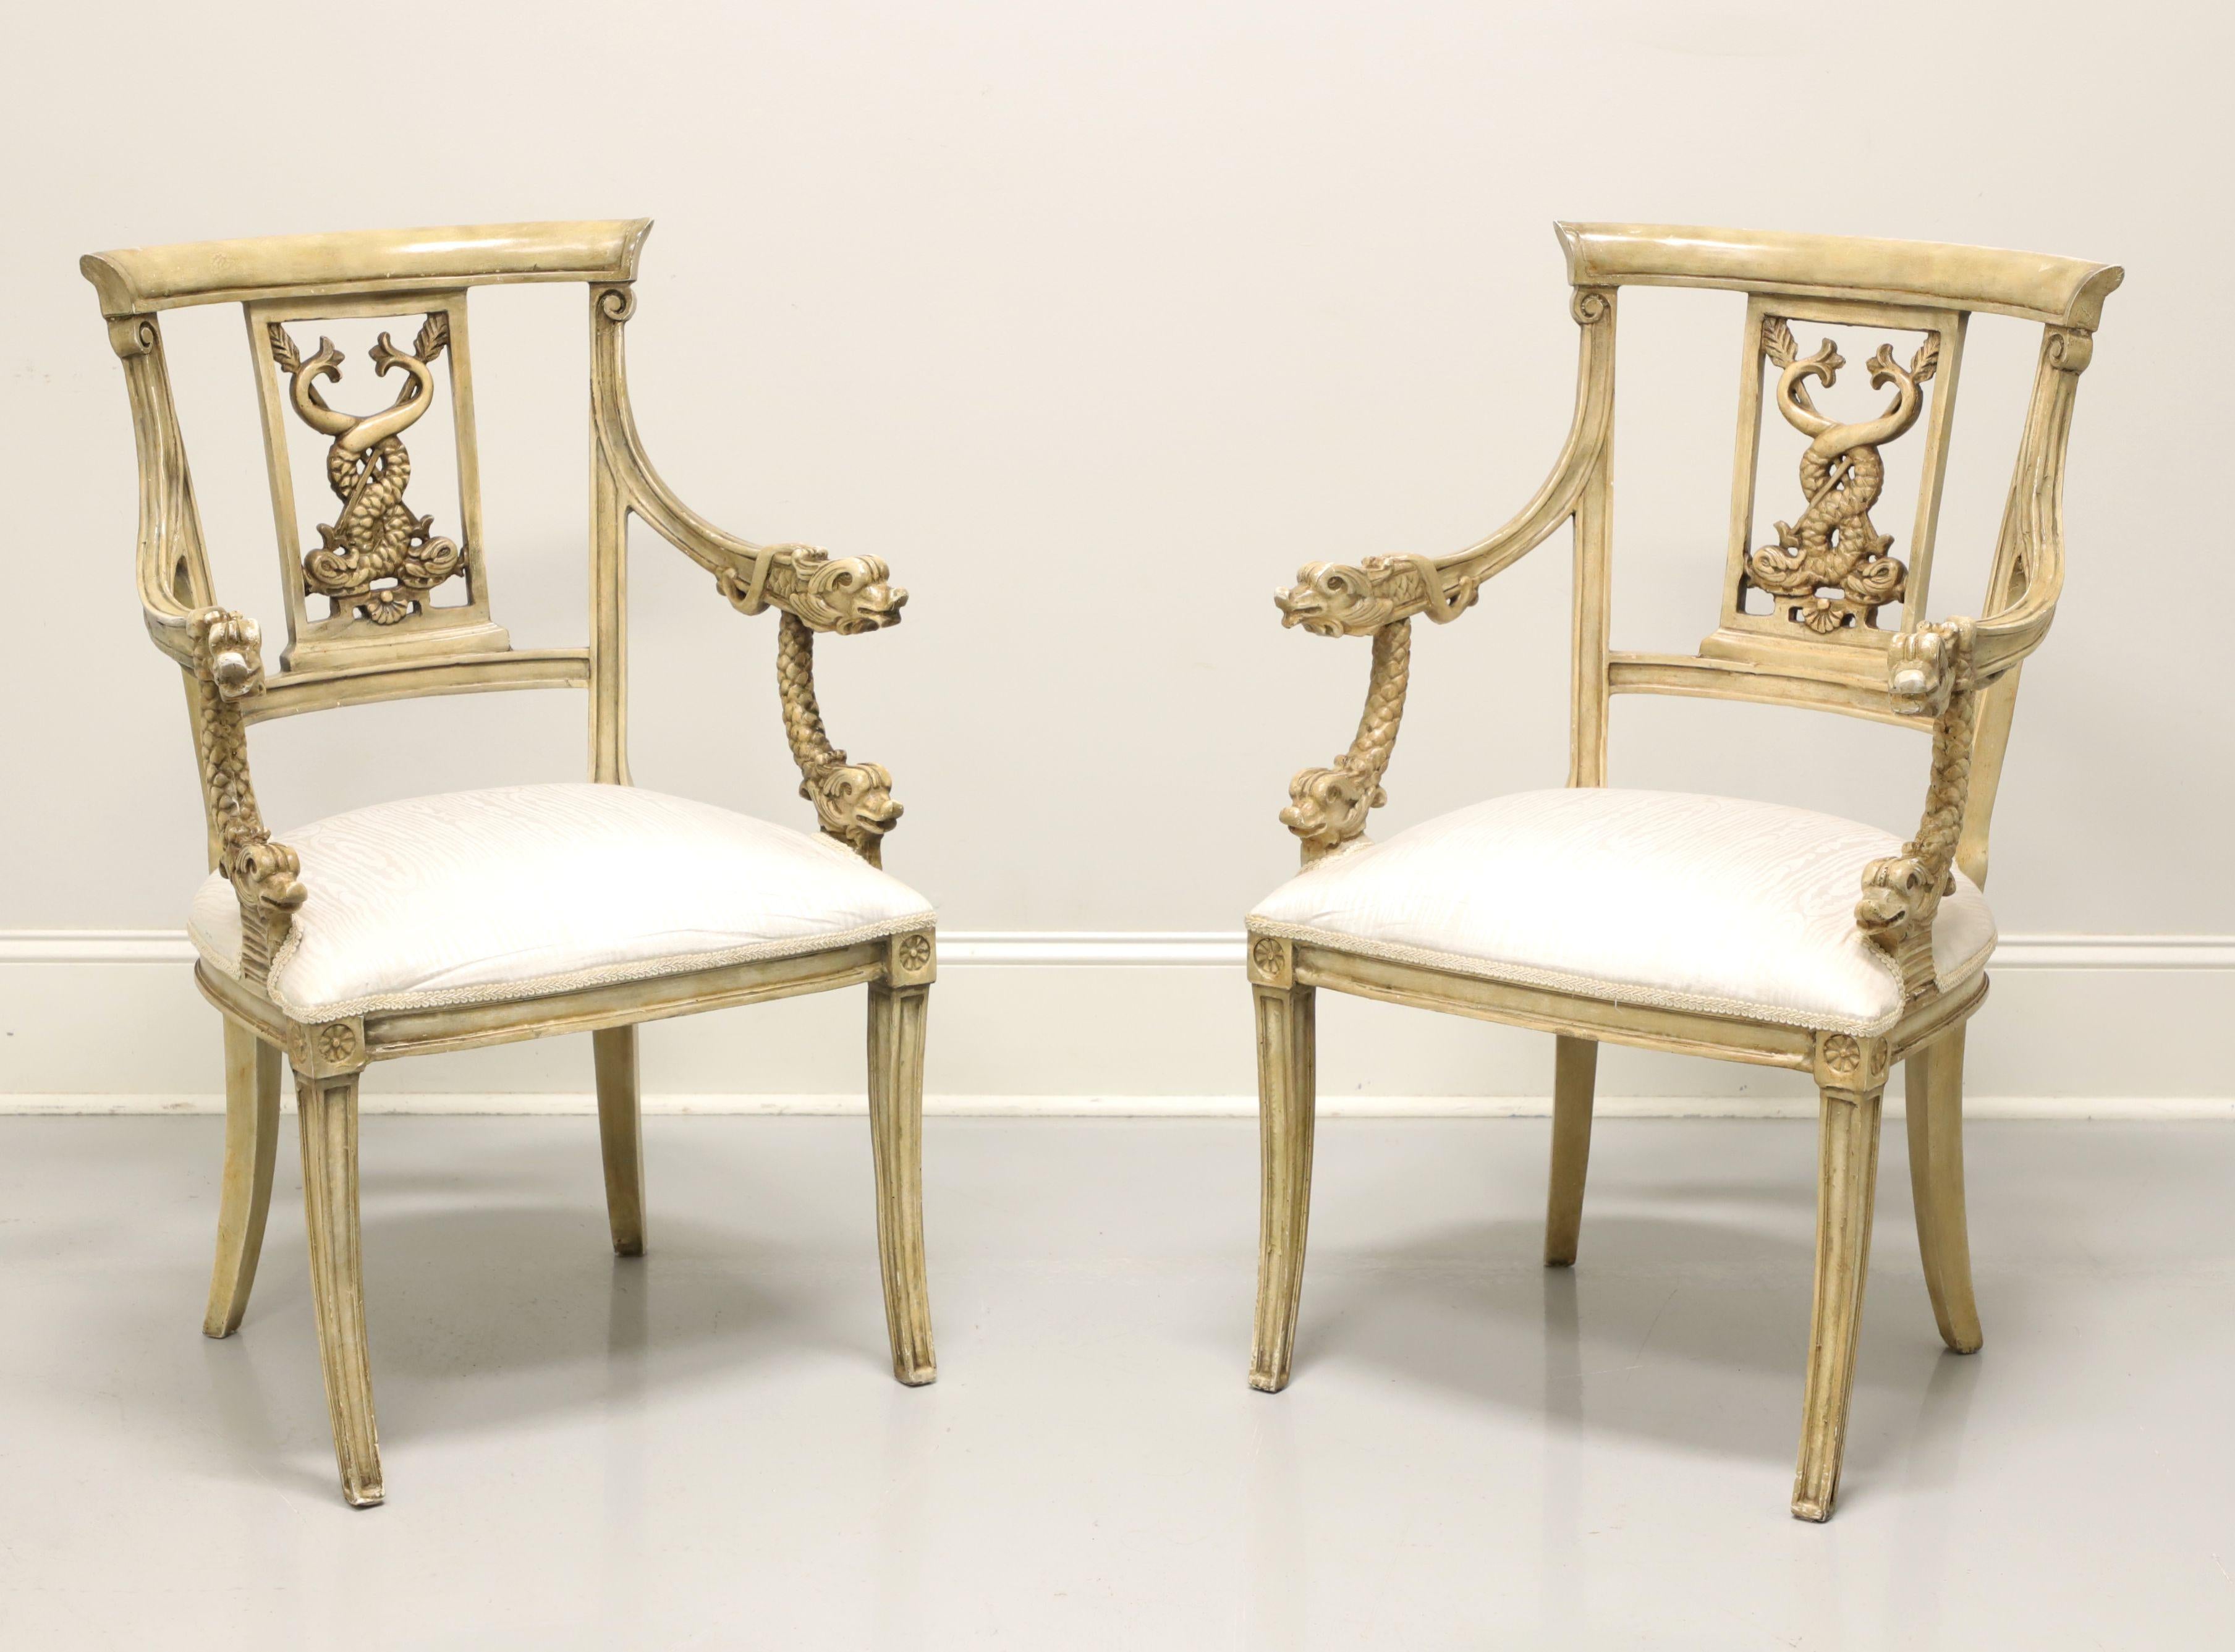 20th Century Italian Impero Style Serpent Head Armchairs - Pair For Sale 5